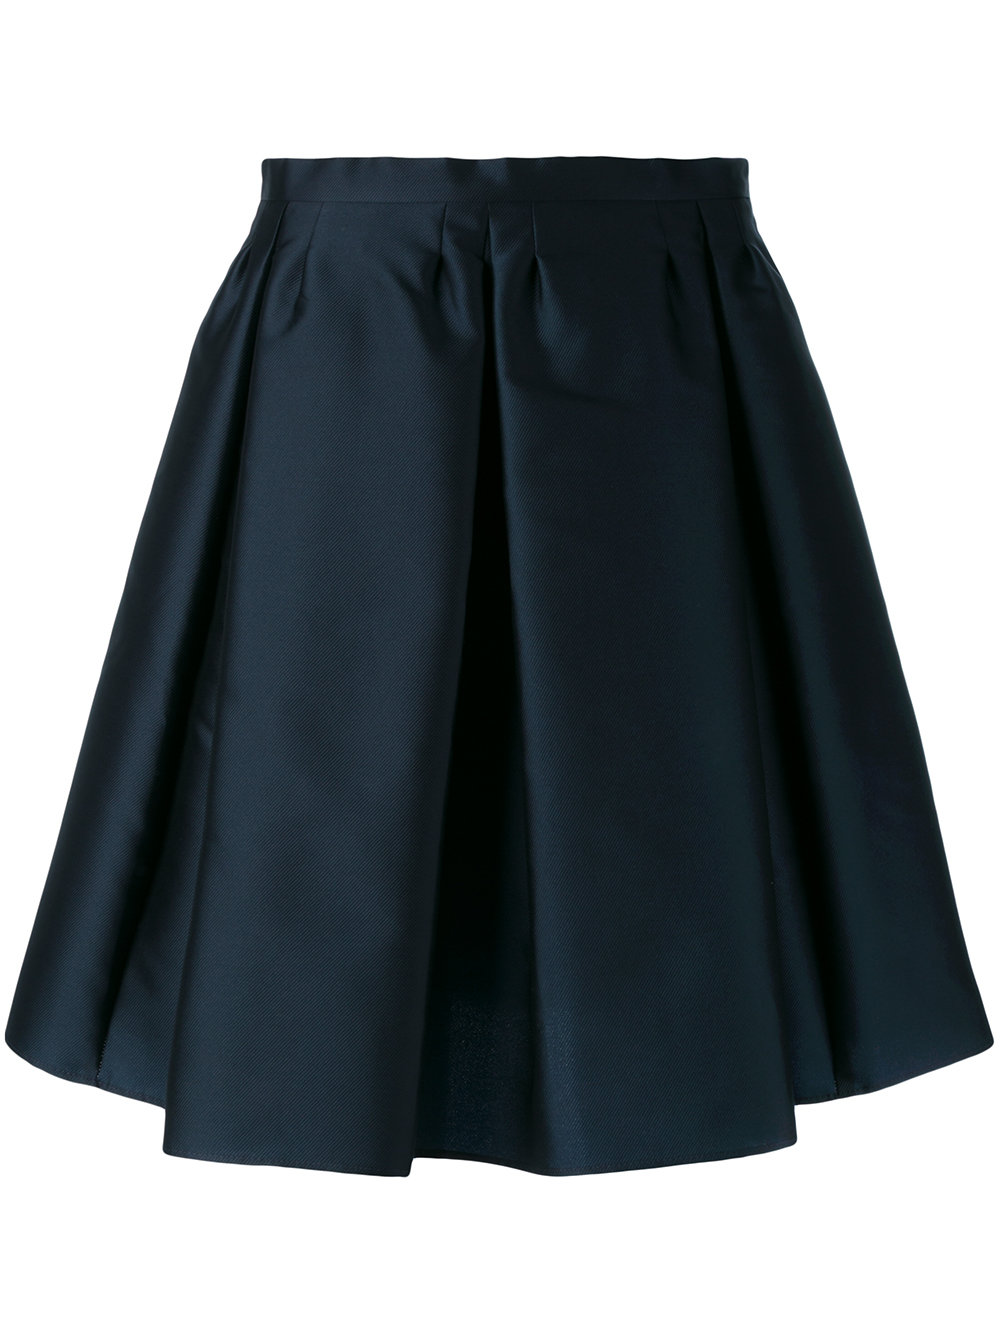 Red Valentino - A-line Skirt - Navy Blue | ABOUT ICONS